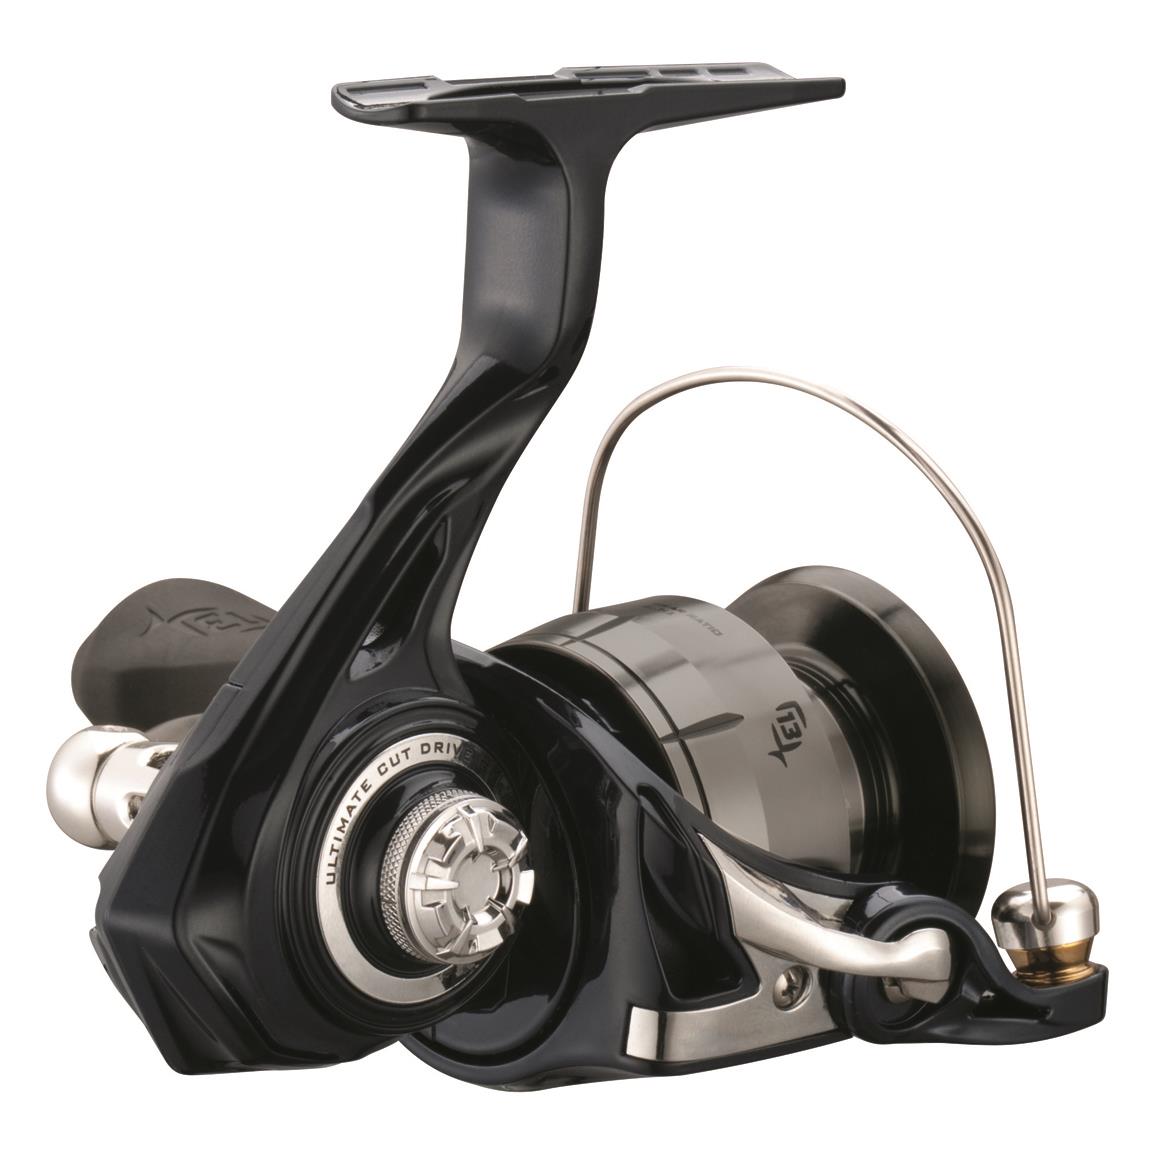 Shimano Miravel Spinning Reel, 6.2:1 Gear Ratio, 3000 Size Reel - 730467, Spinning  Reels at Sportsman's Guide